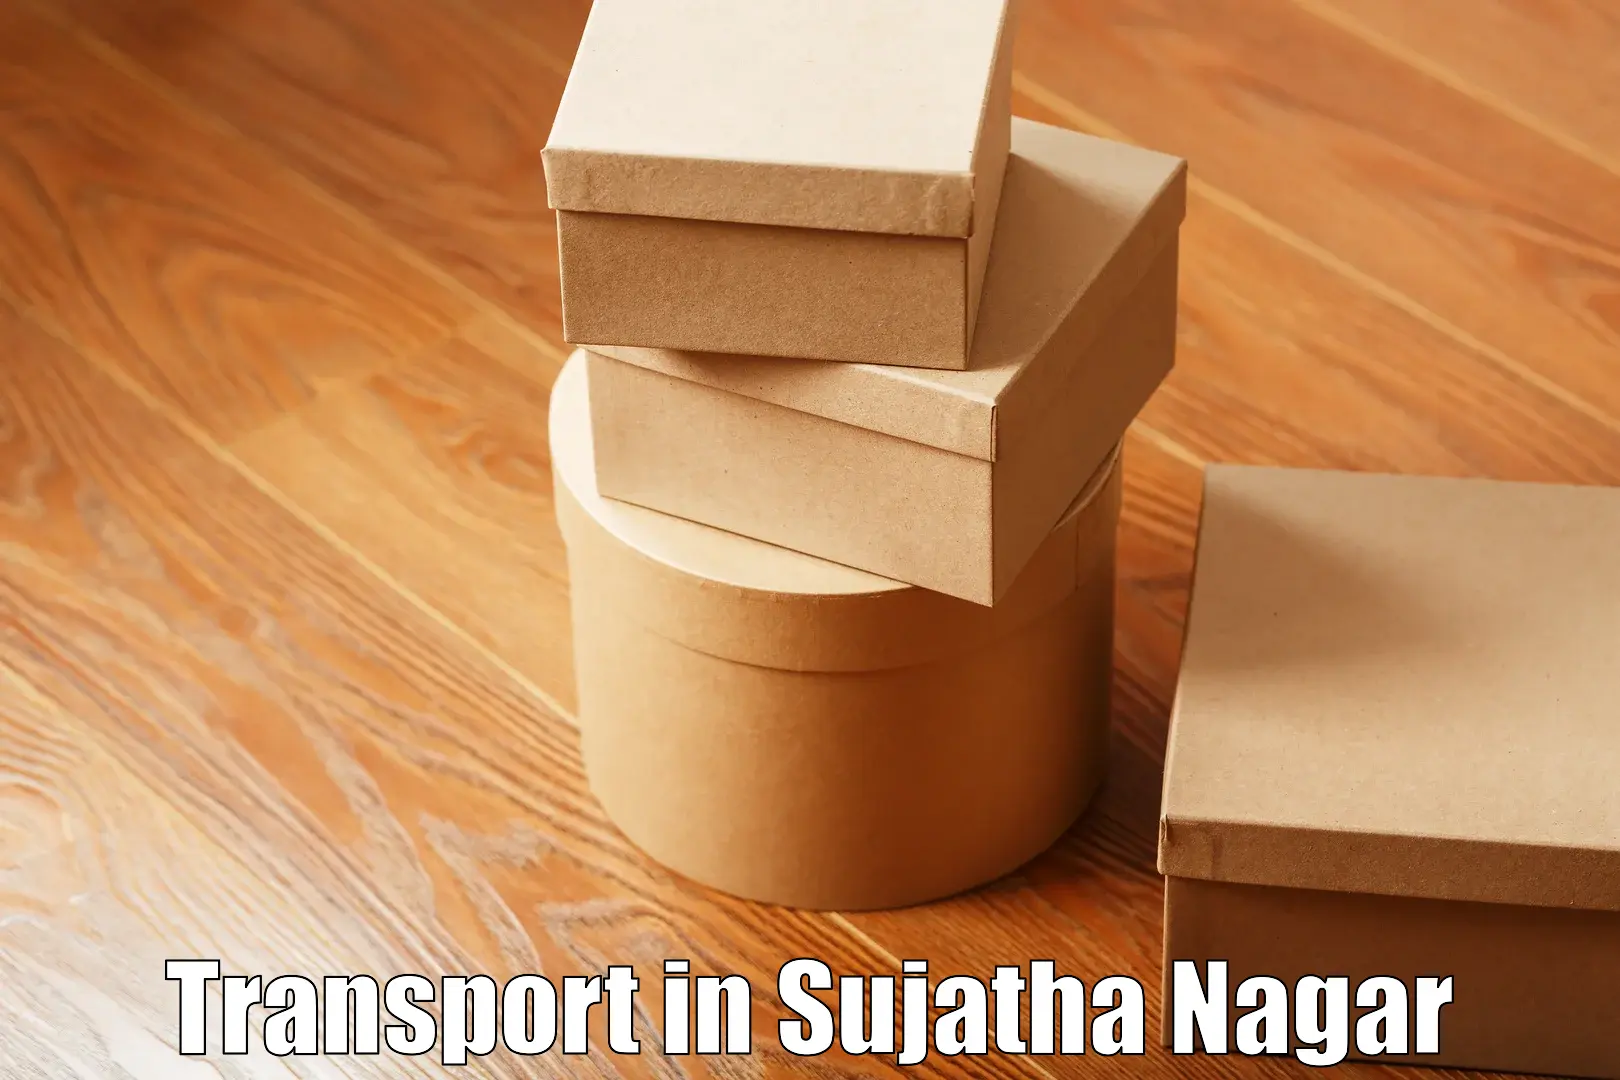 Luggage transport services in Sujatha Nagar